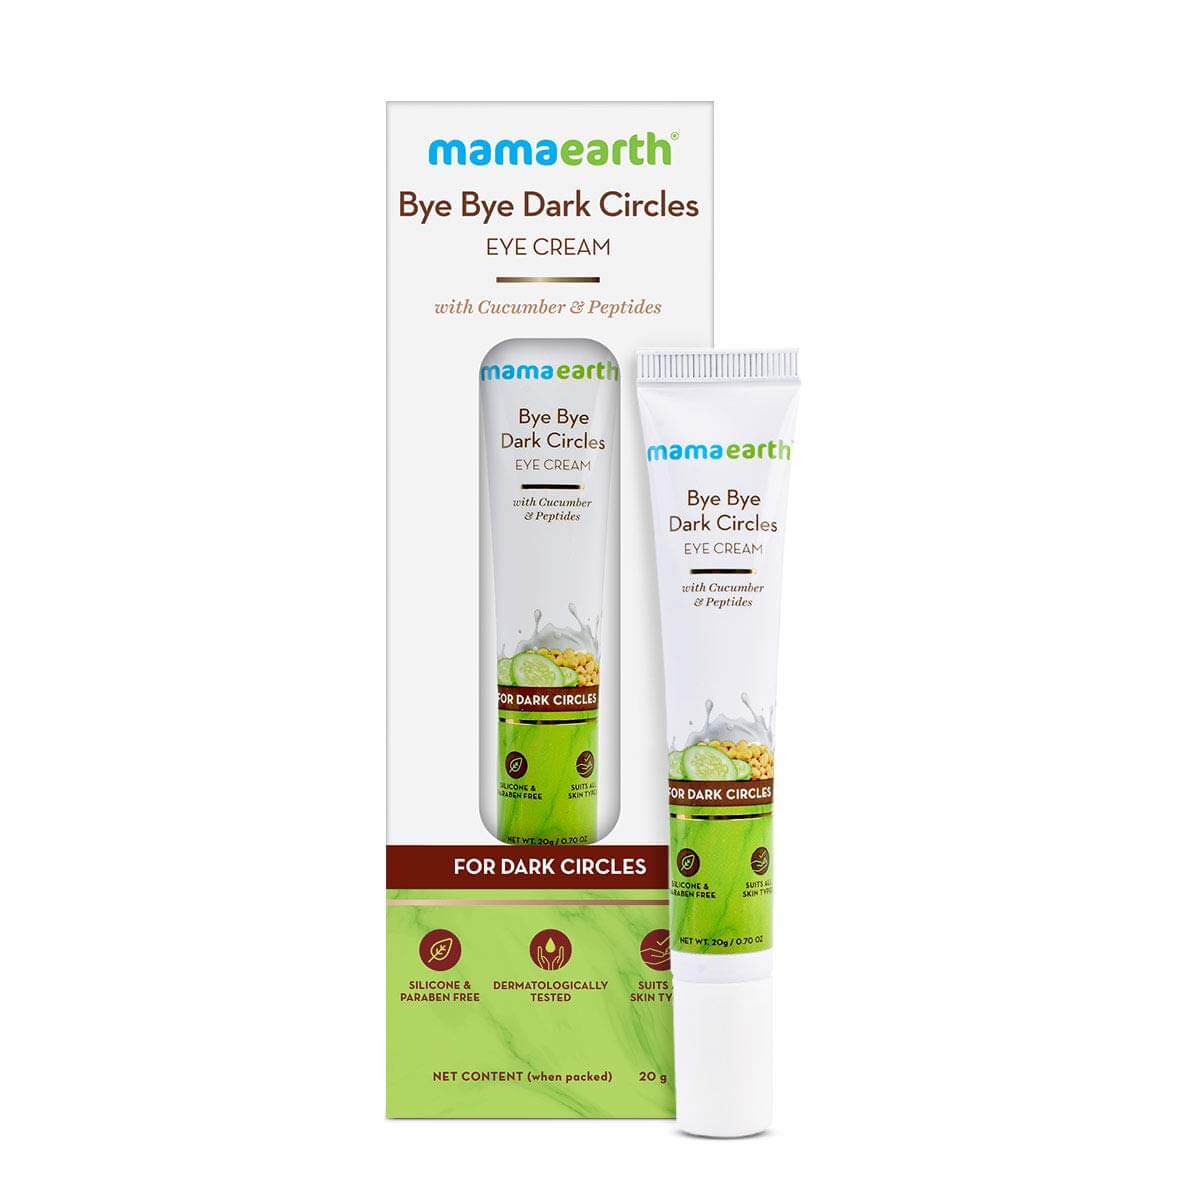 Mamaearth Bye Bye Dark Circles Eye Cream helps to rejuvenate the eyes with the goodness of natural ingredients